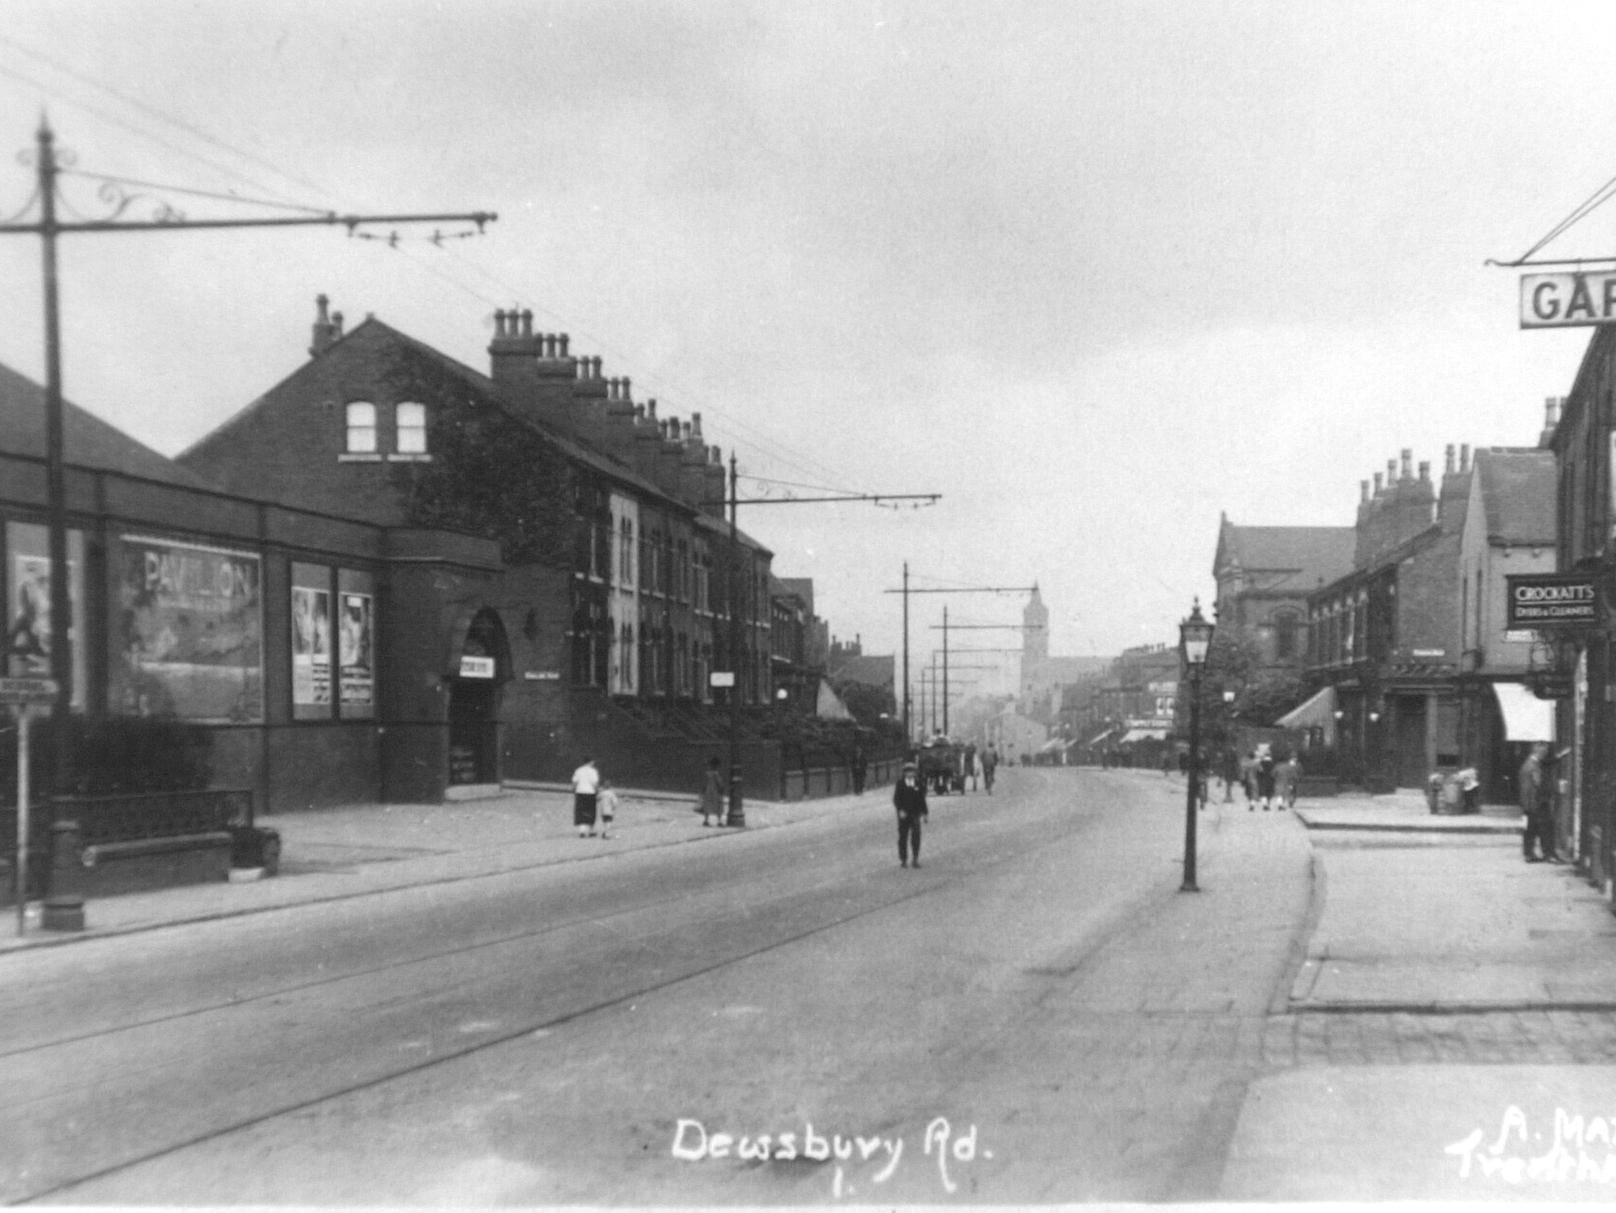 A calm and quiet Dewsbury Road in the 1920s.